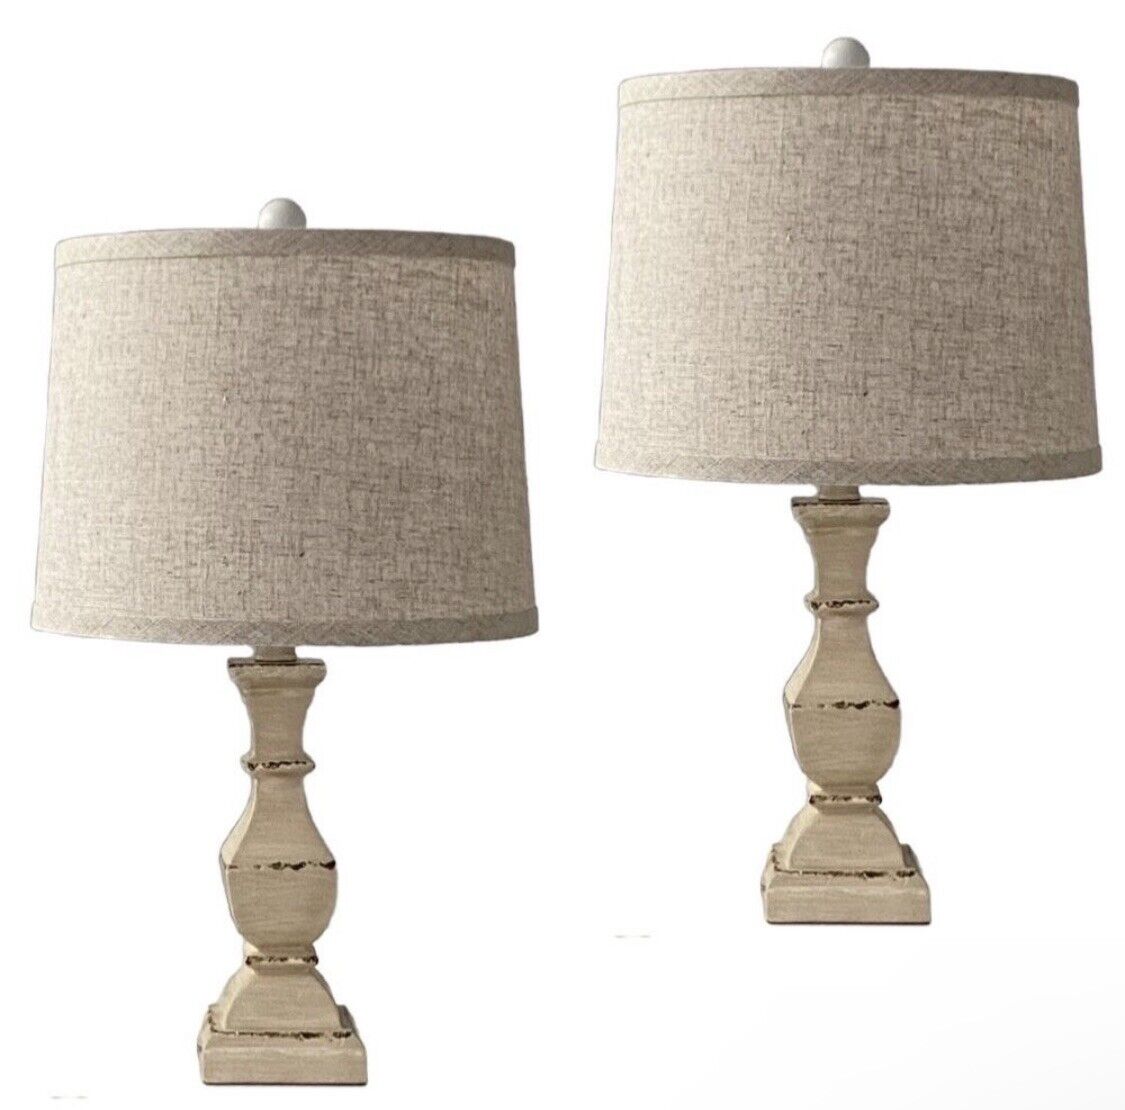 Set of 2 retro table lamps Vintage rustic table lamps